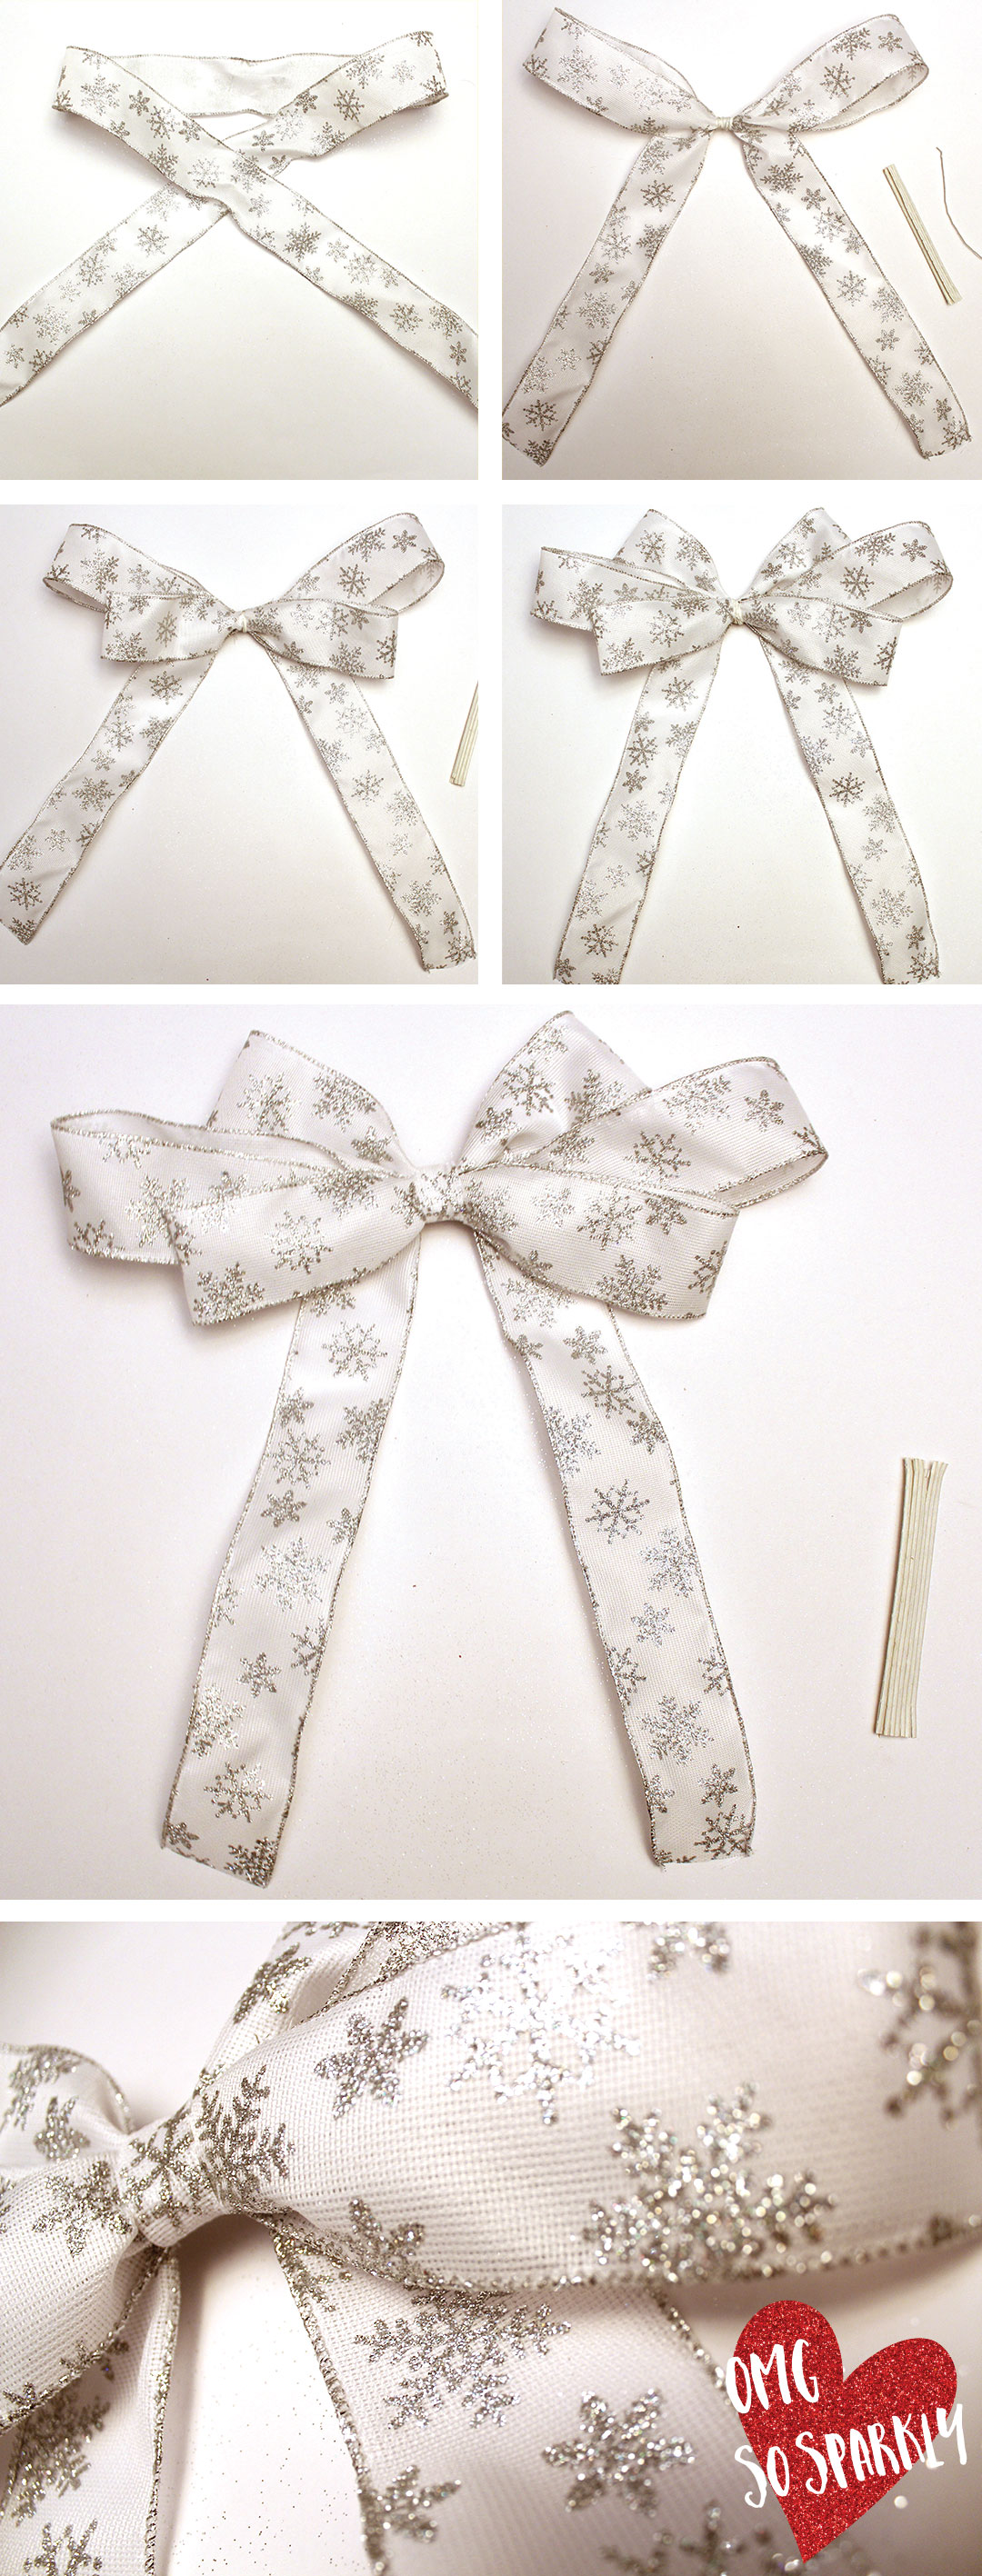 how to make the bow for your wreath